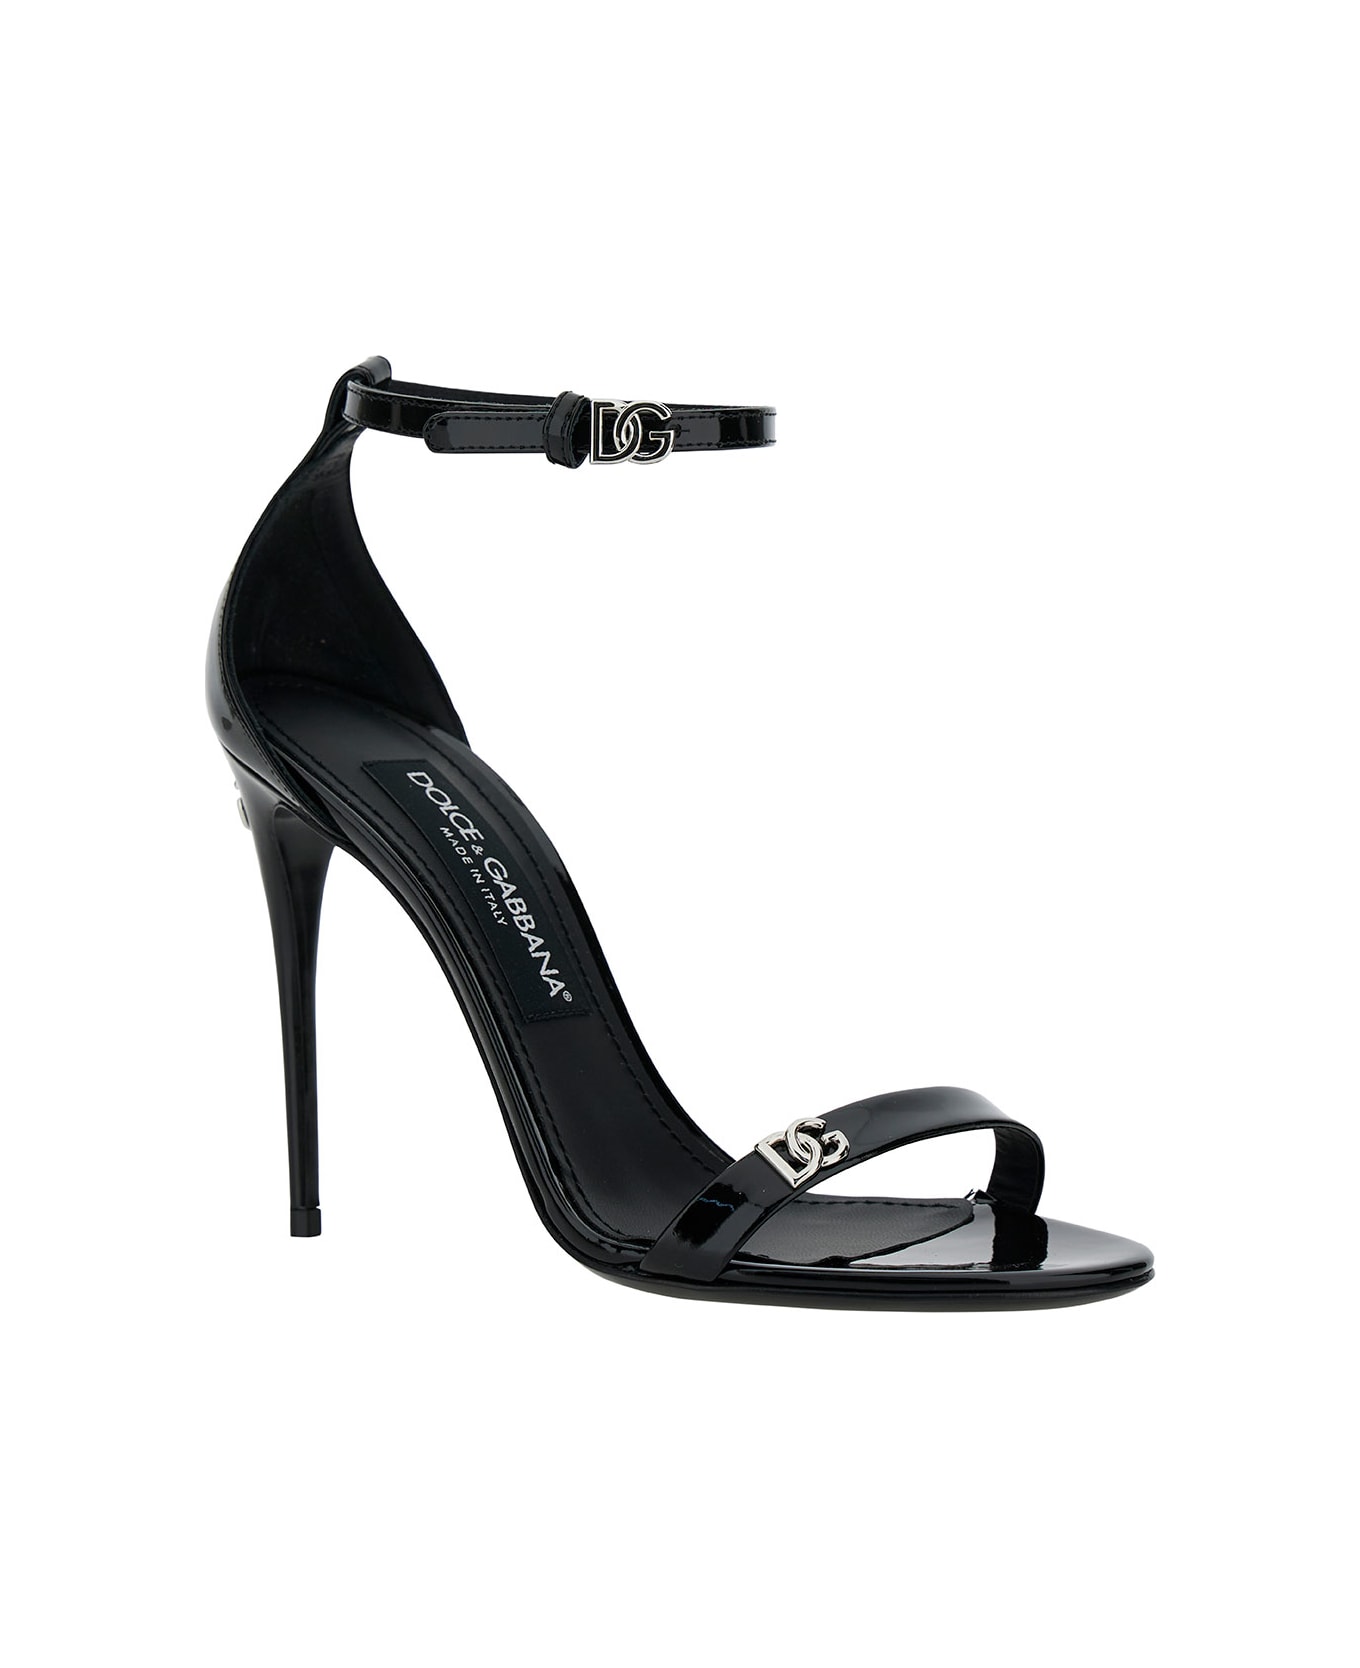 Dolce & Gabbana Black Sandals With Dg Logo Detail In Patent Leather Woman - Black